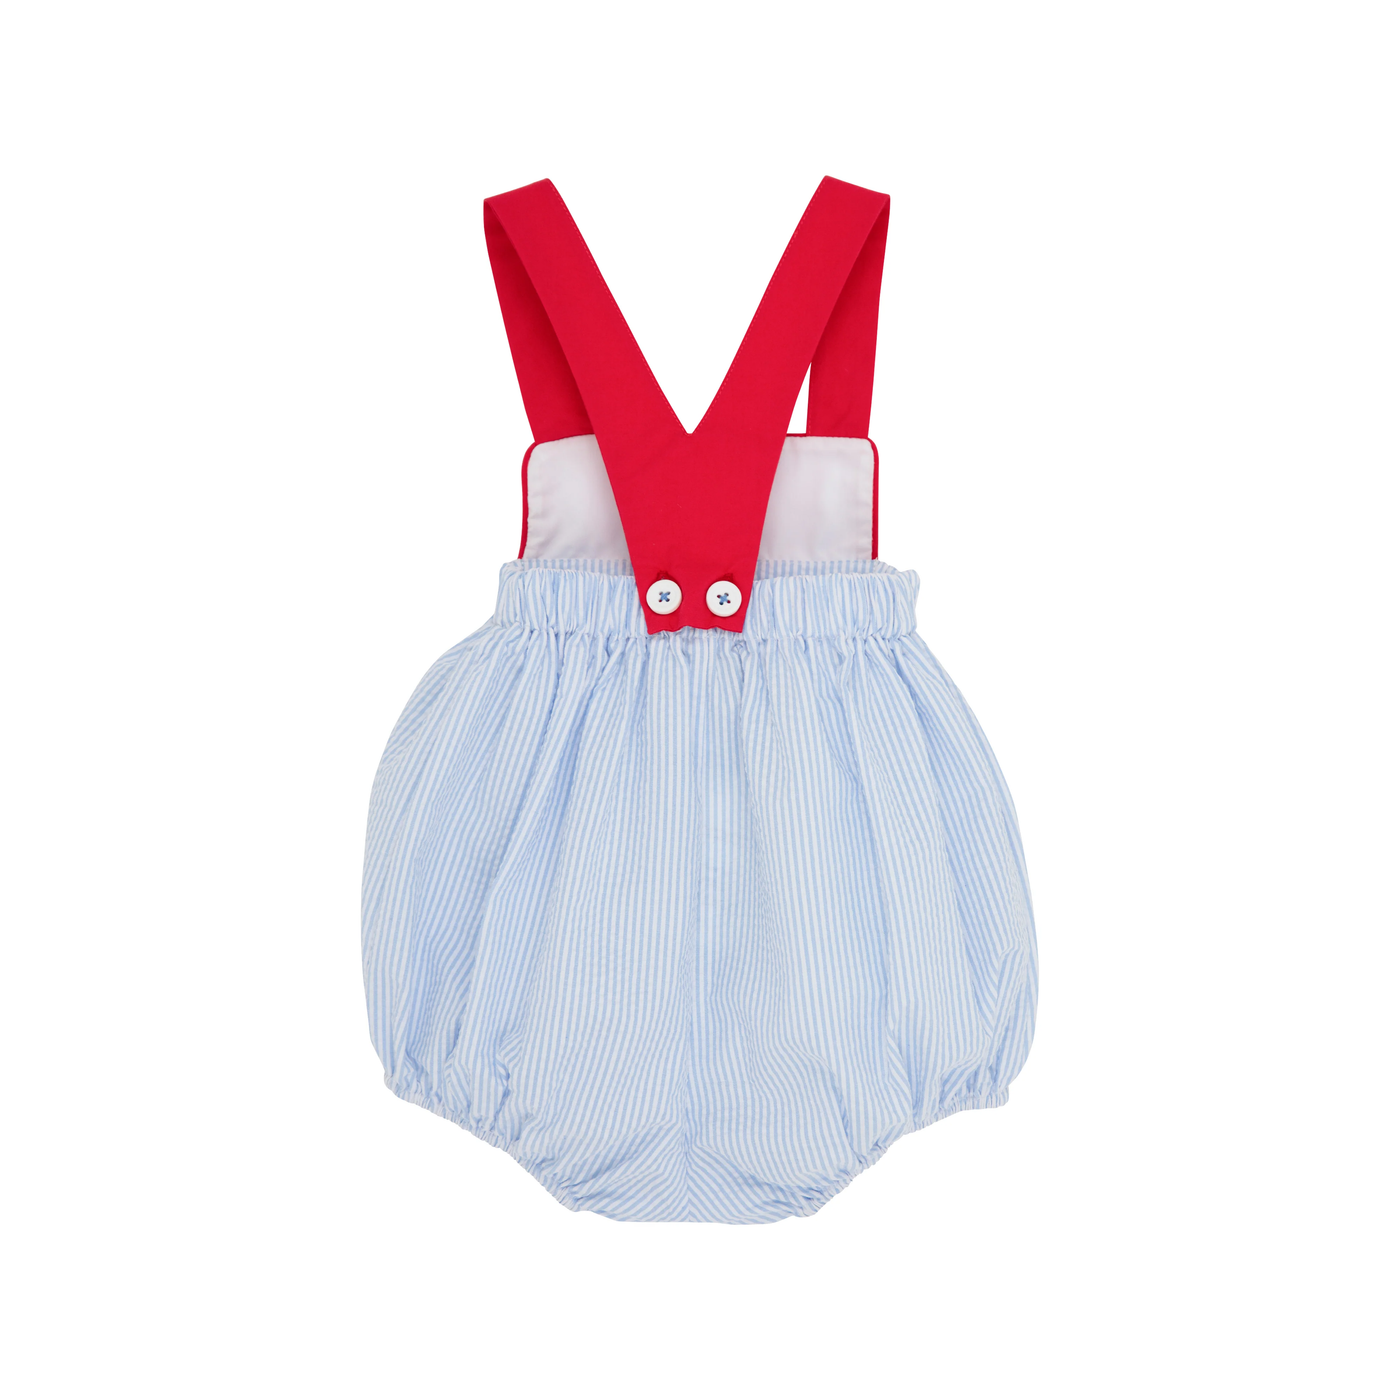 Samprey Sunsuit - Breakers Blue Seersucker With Worth Avenue White And Richmond Red